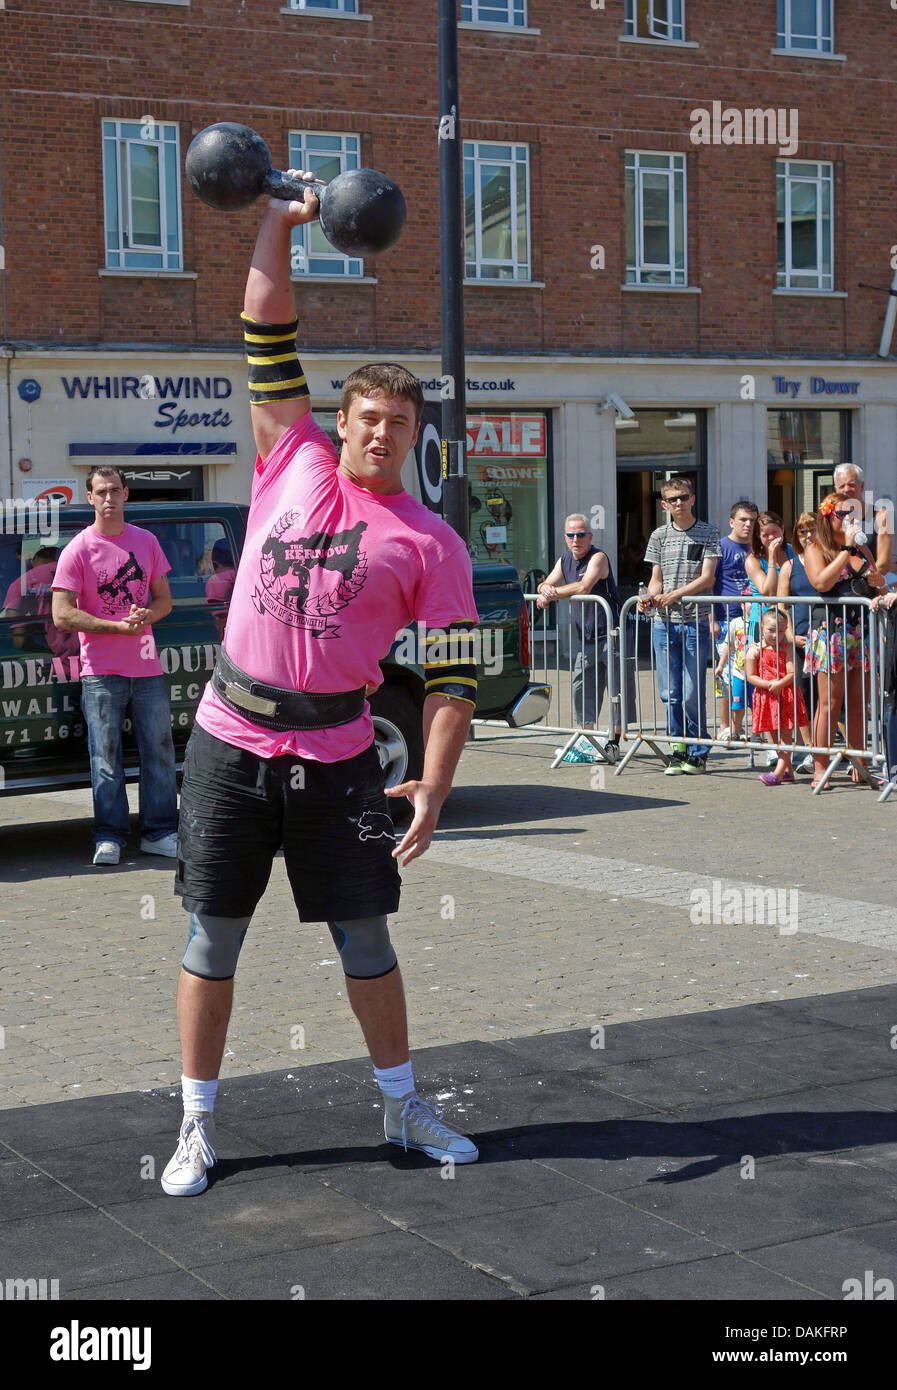 A competitor in the ' Kernow strongman ' contest in Truro, Cornwall, UK Stock Photo